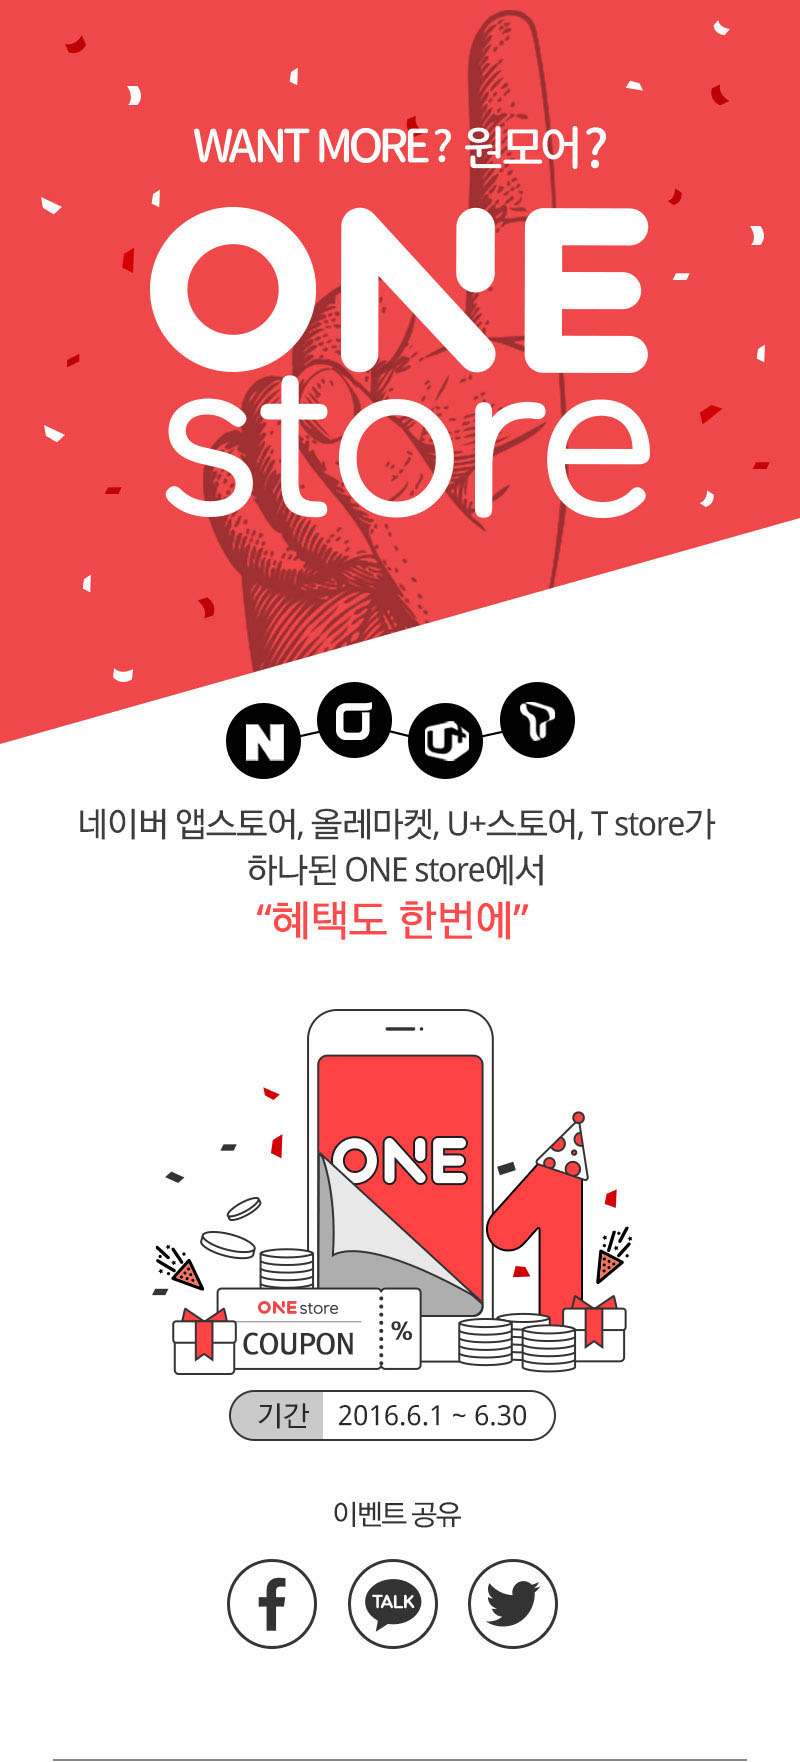 WANT MORE? 원 모어? ONE store